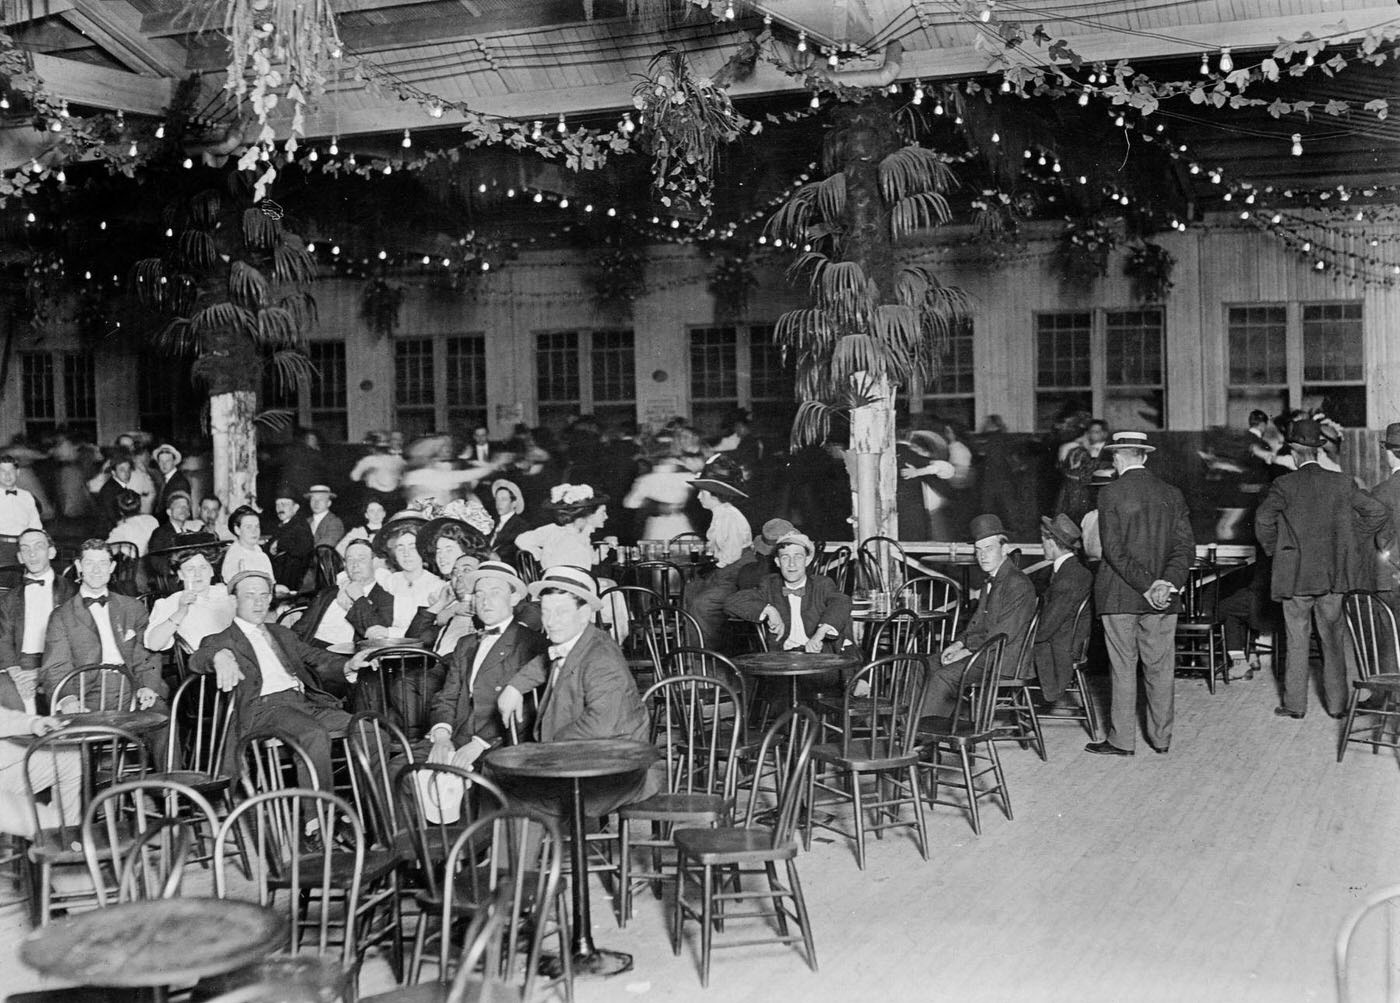 A Group Of Men And Women Watch People Dance On The Dance Floor At A Dance Hall, Harlem, 1912